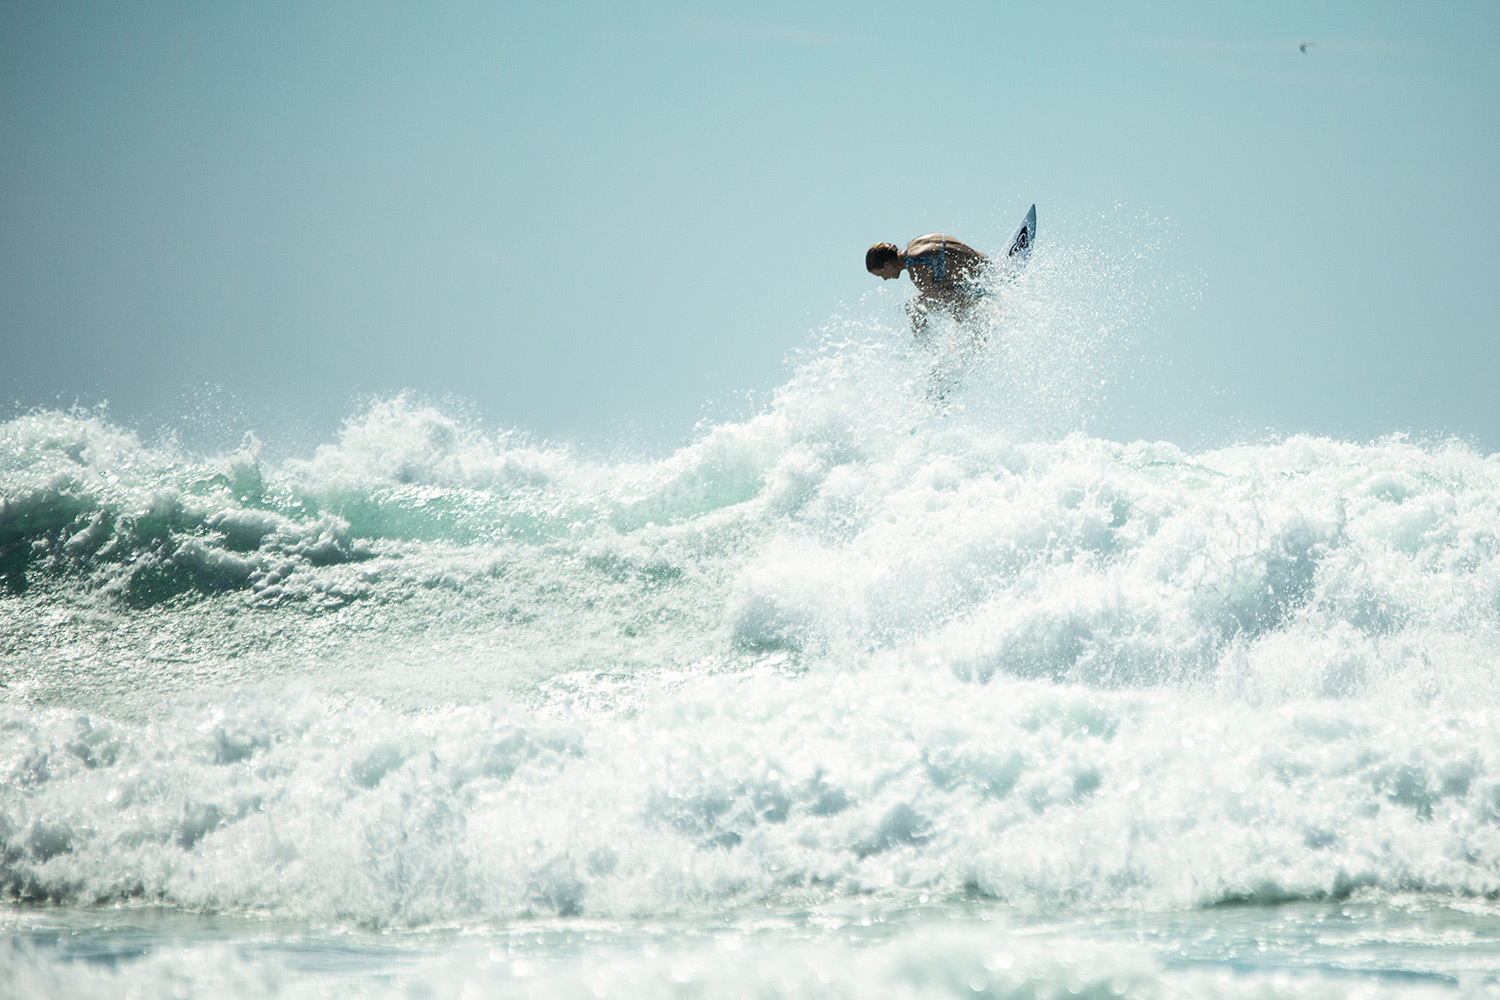 Cooling off in Cabarita during the #ROXYpro